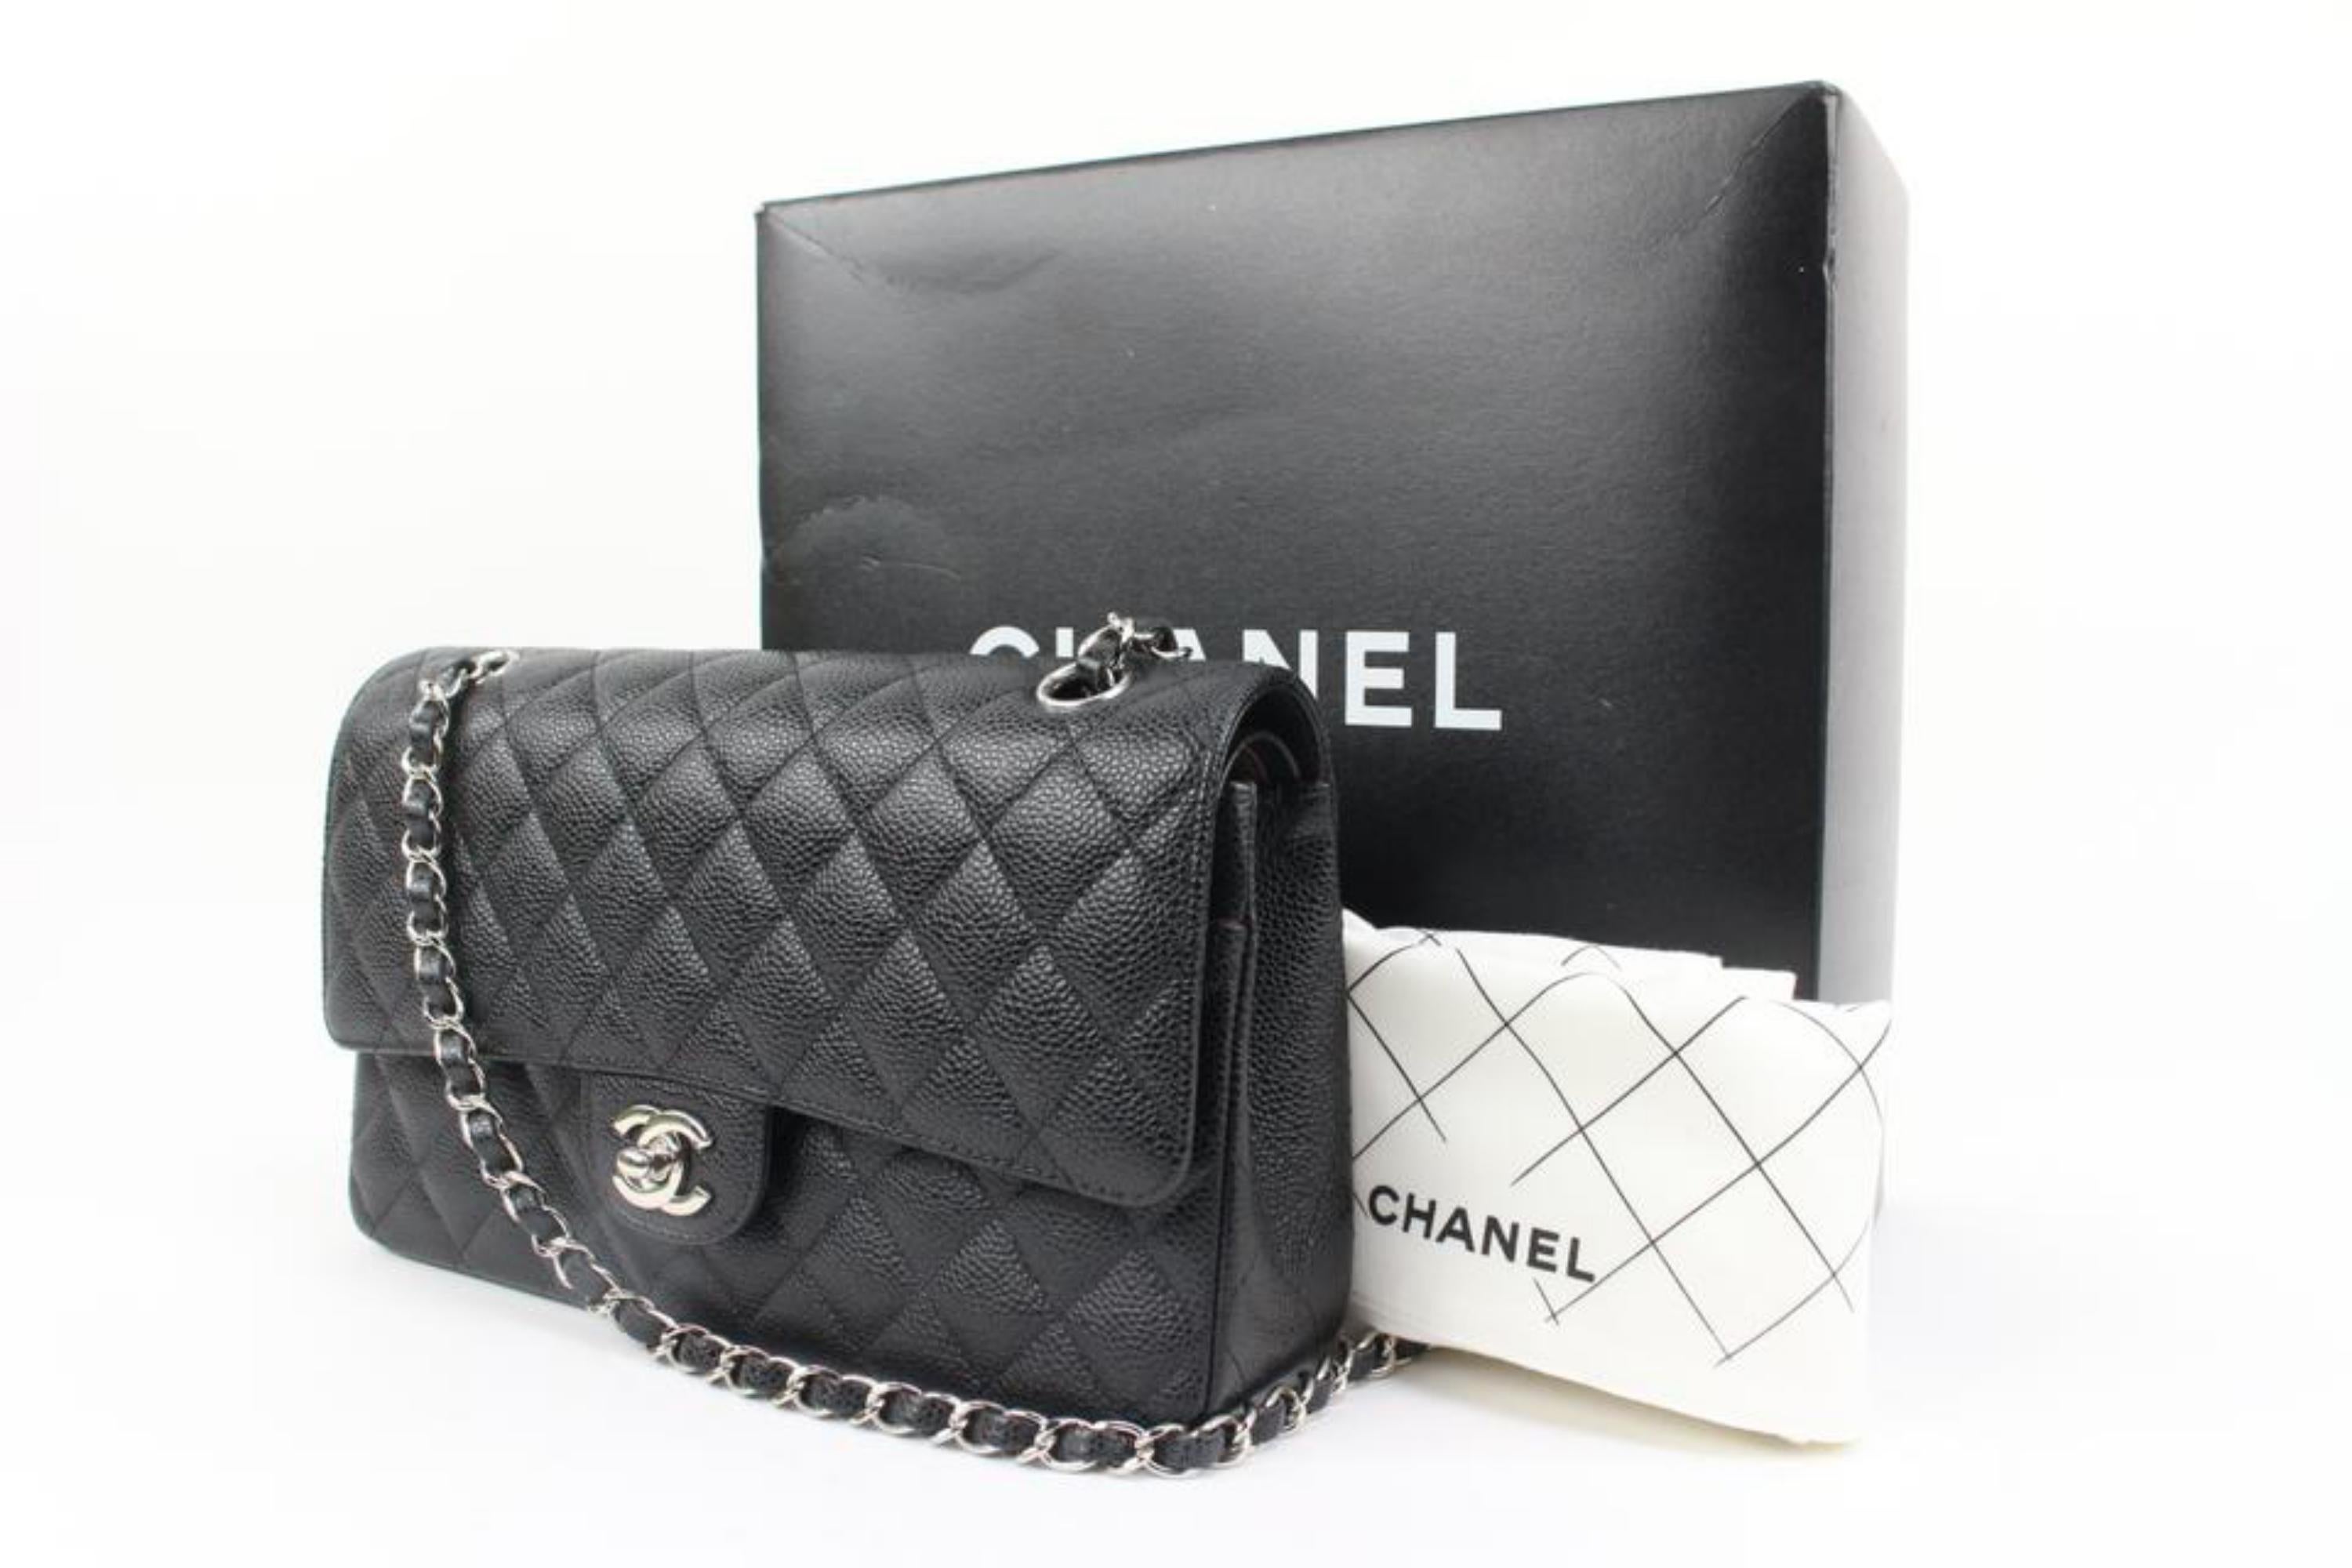 Chanel Rare Silver HW Black Quilted Caviar Medium Classic Double Flap 78ck33s
Date Code/Serial Number: 8826338
Made In: France
Measurements: Length:  10